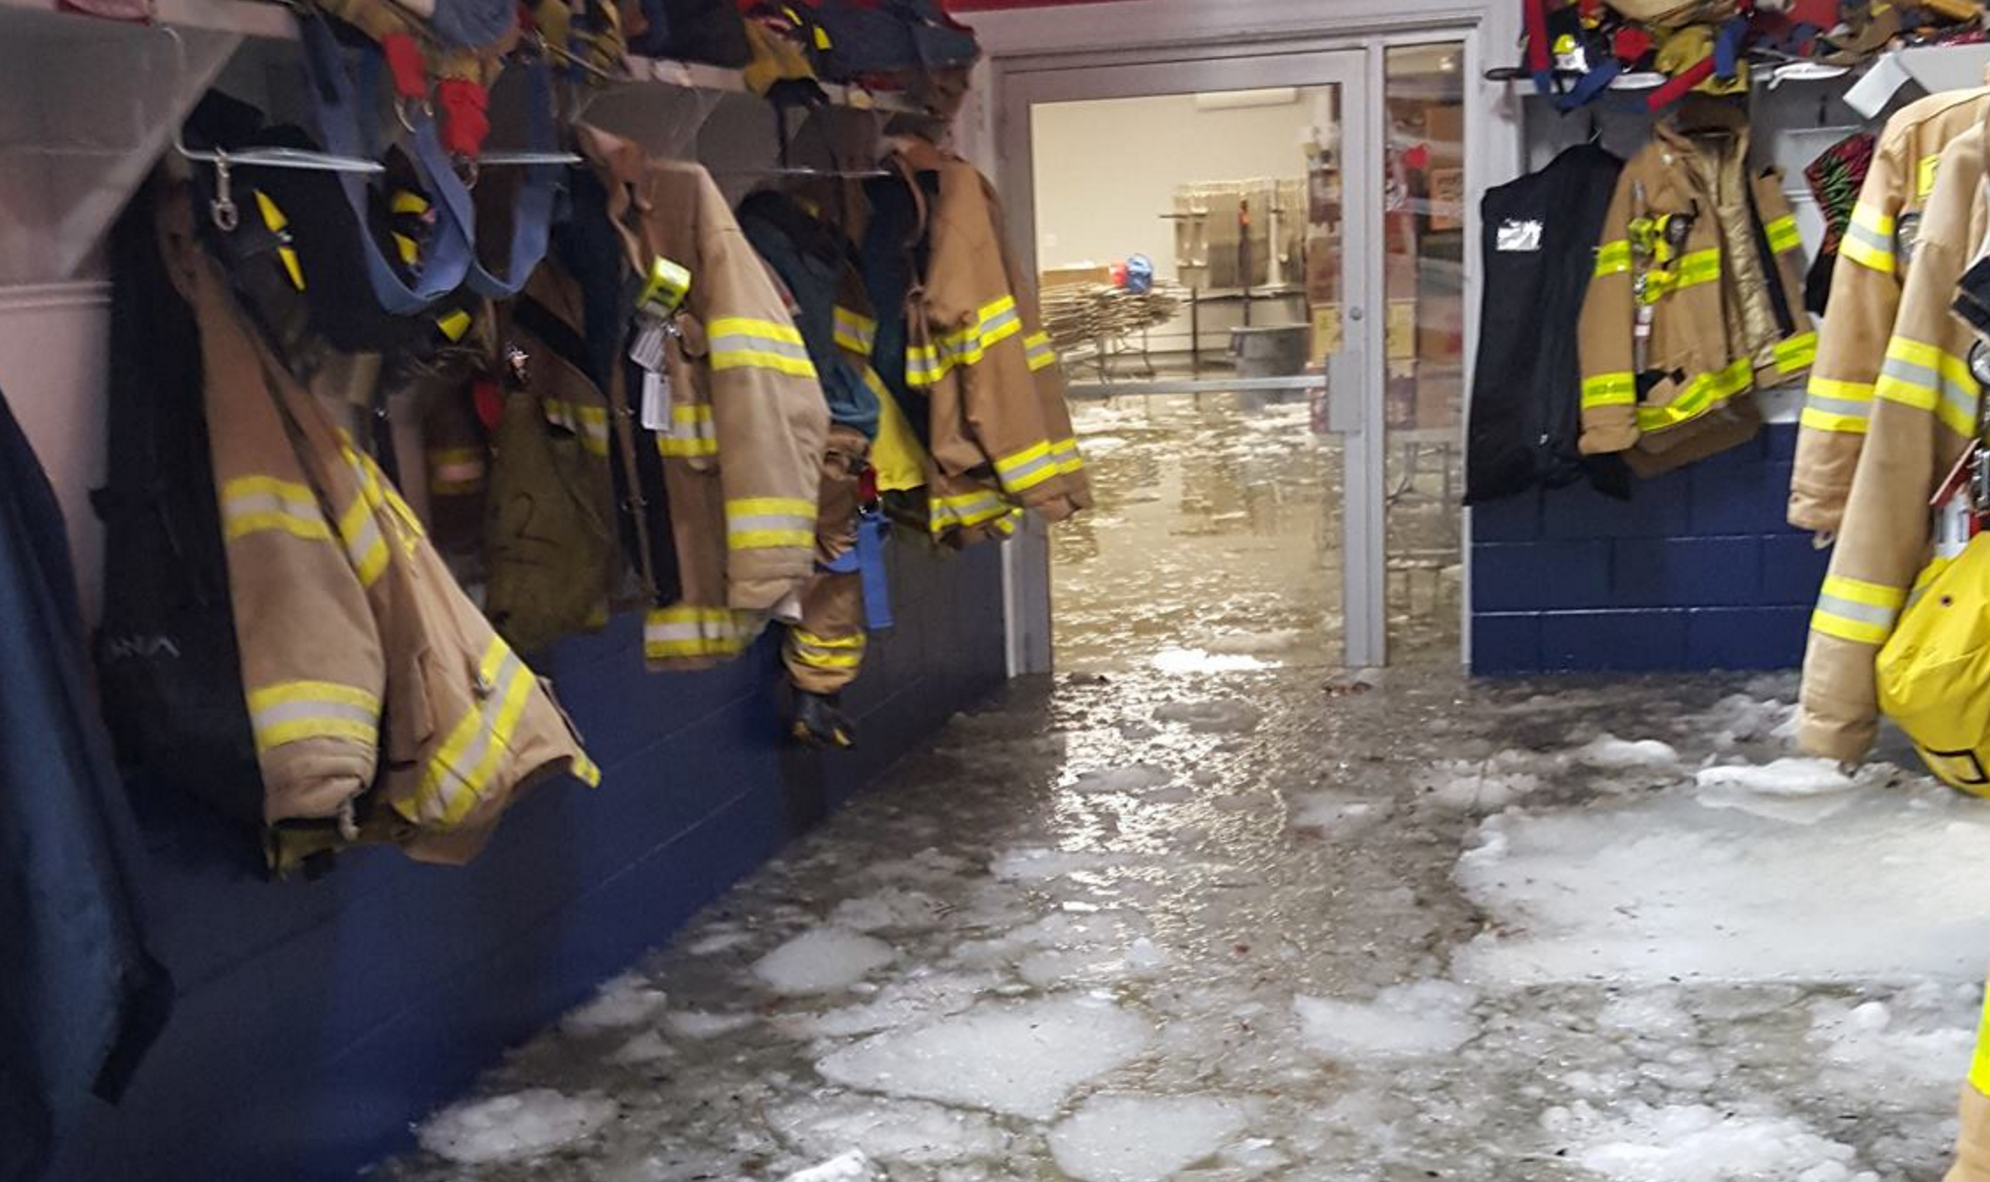  Icy tidal waters in the Beach Haven Volunteer Fire Company station house Saturday evening.  